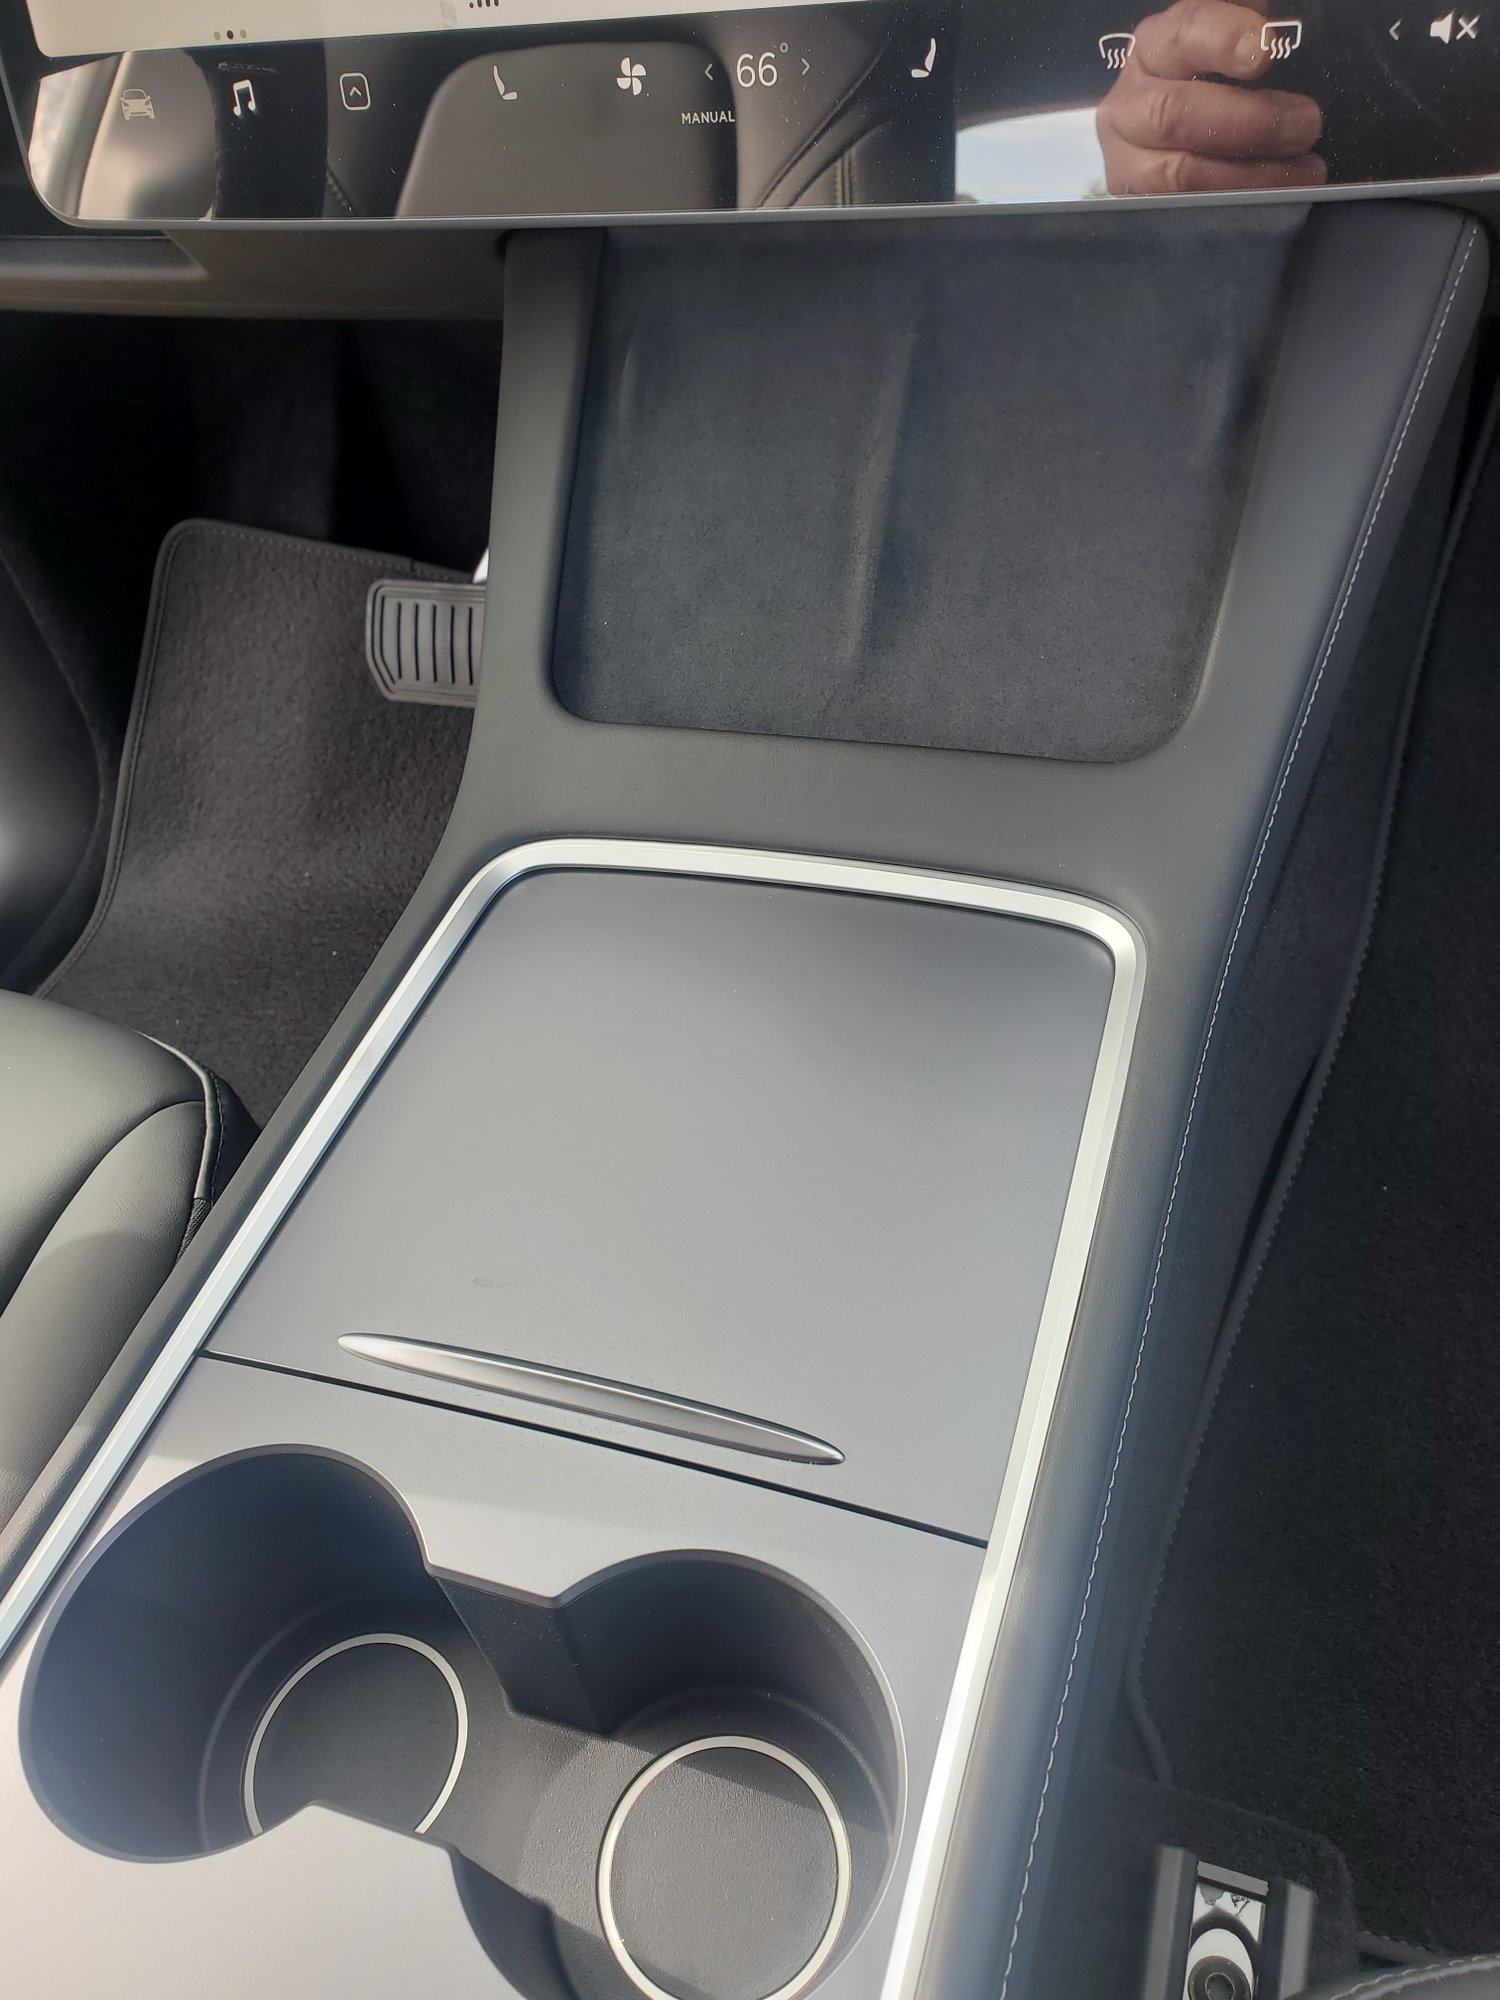 Model Y front center console.jpg